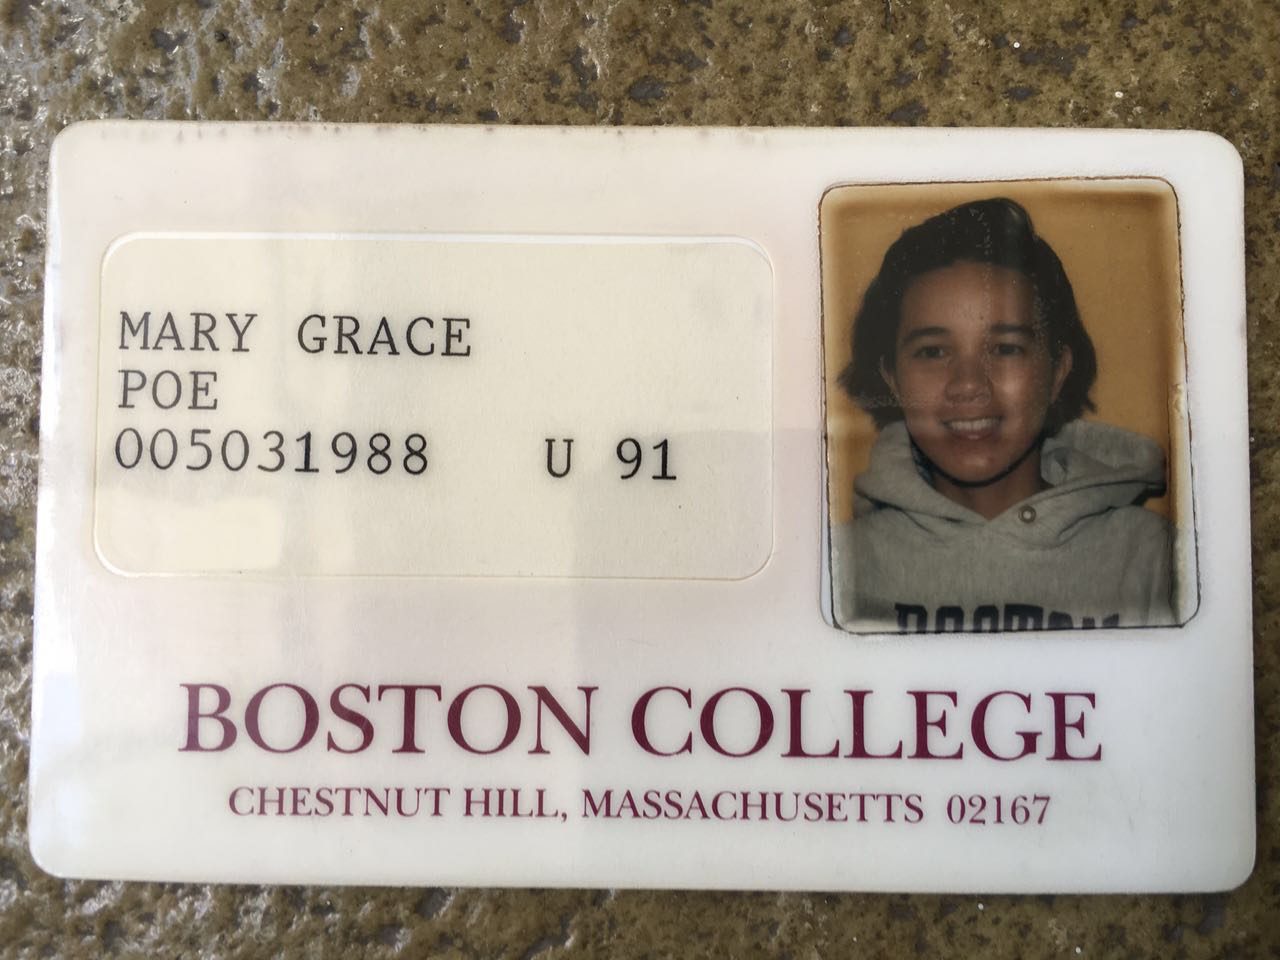 LOOK: ‘Fake’ SSN? Poe shows Boston College ID to disprove it